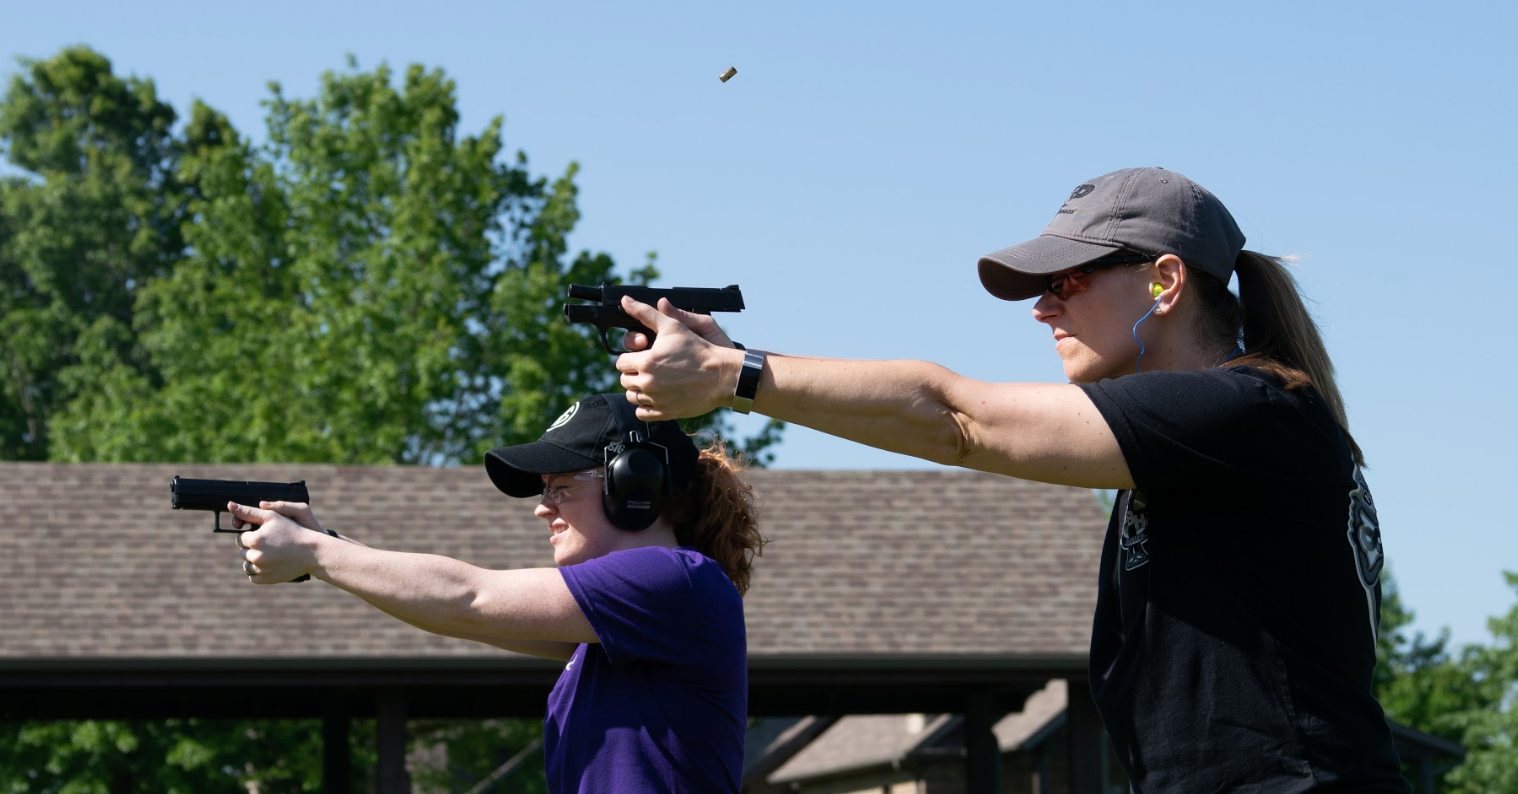 Women's Holster Talk - Under Arm Holsters - The Well Armed Woman